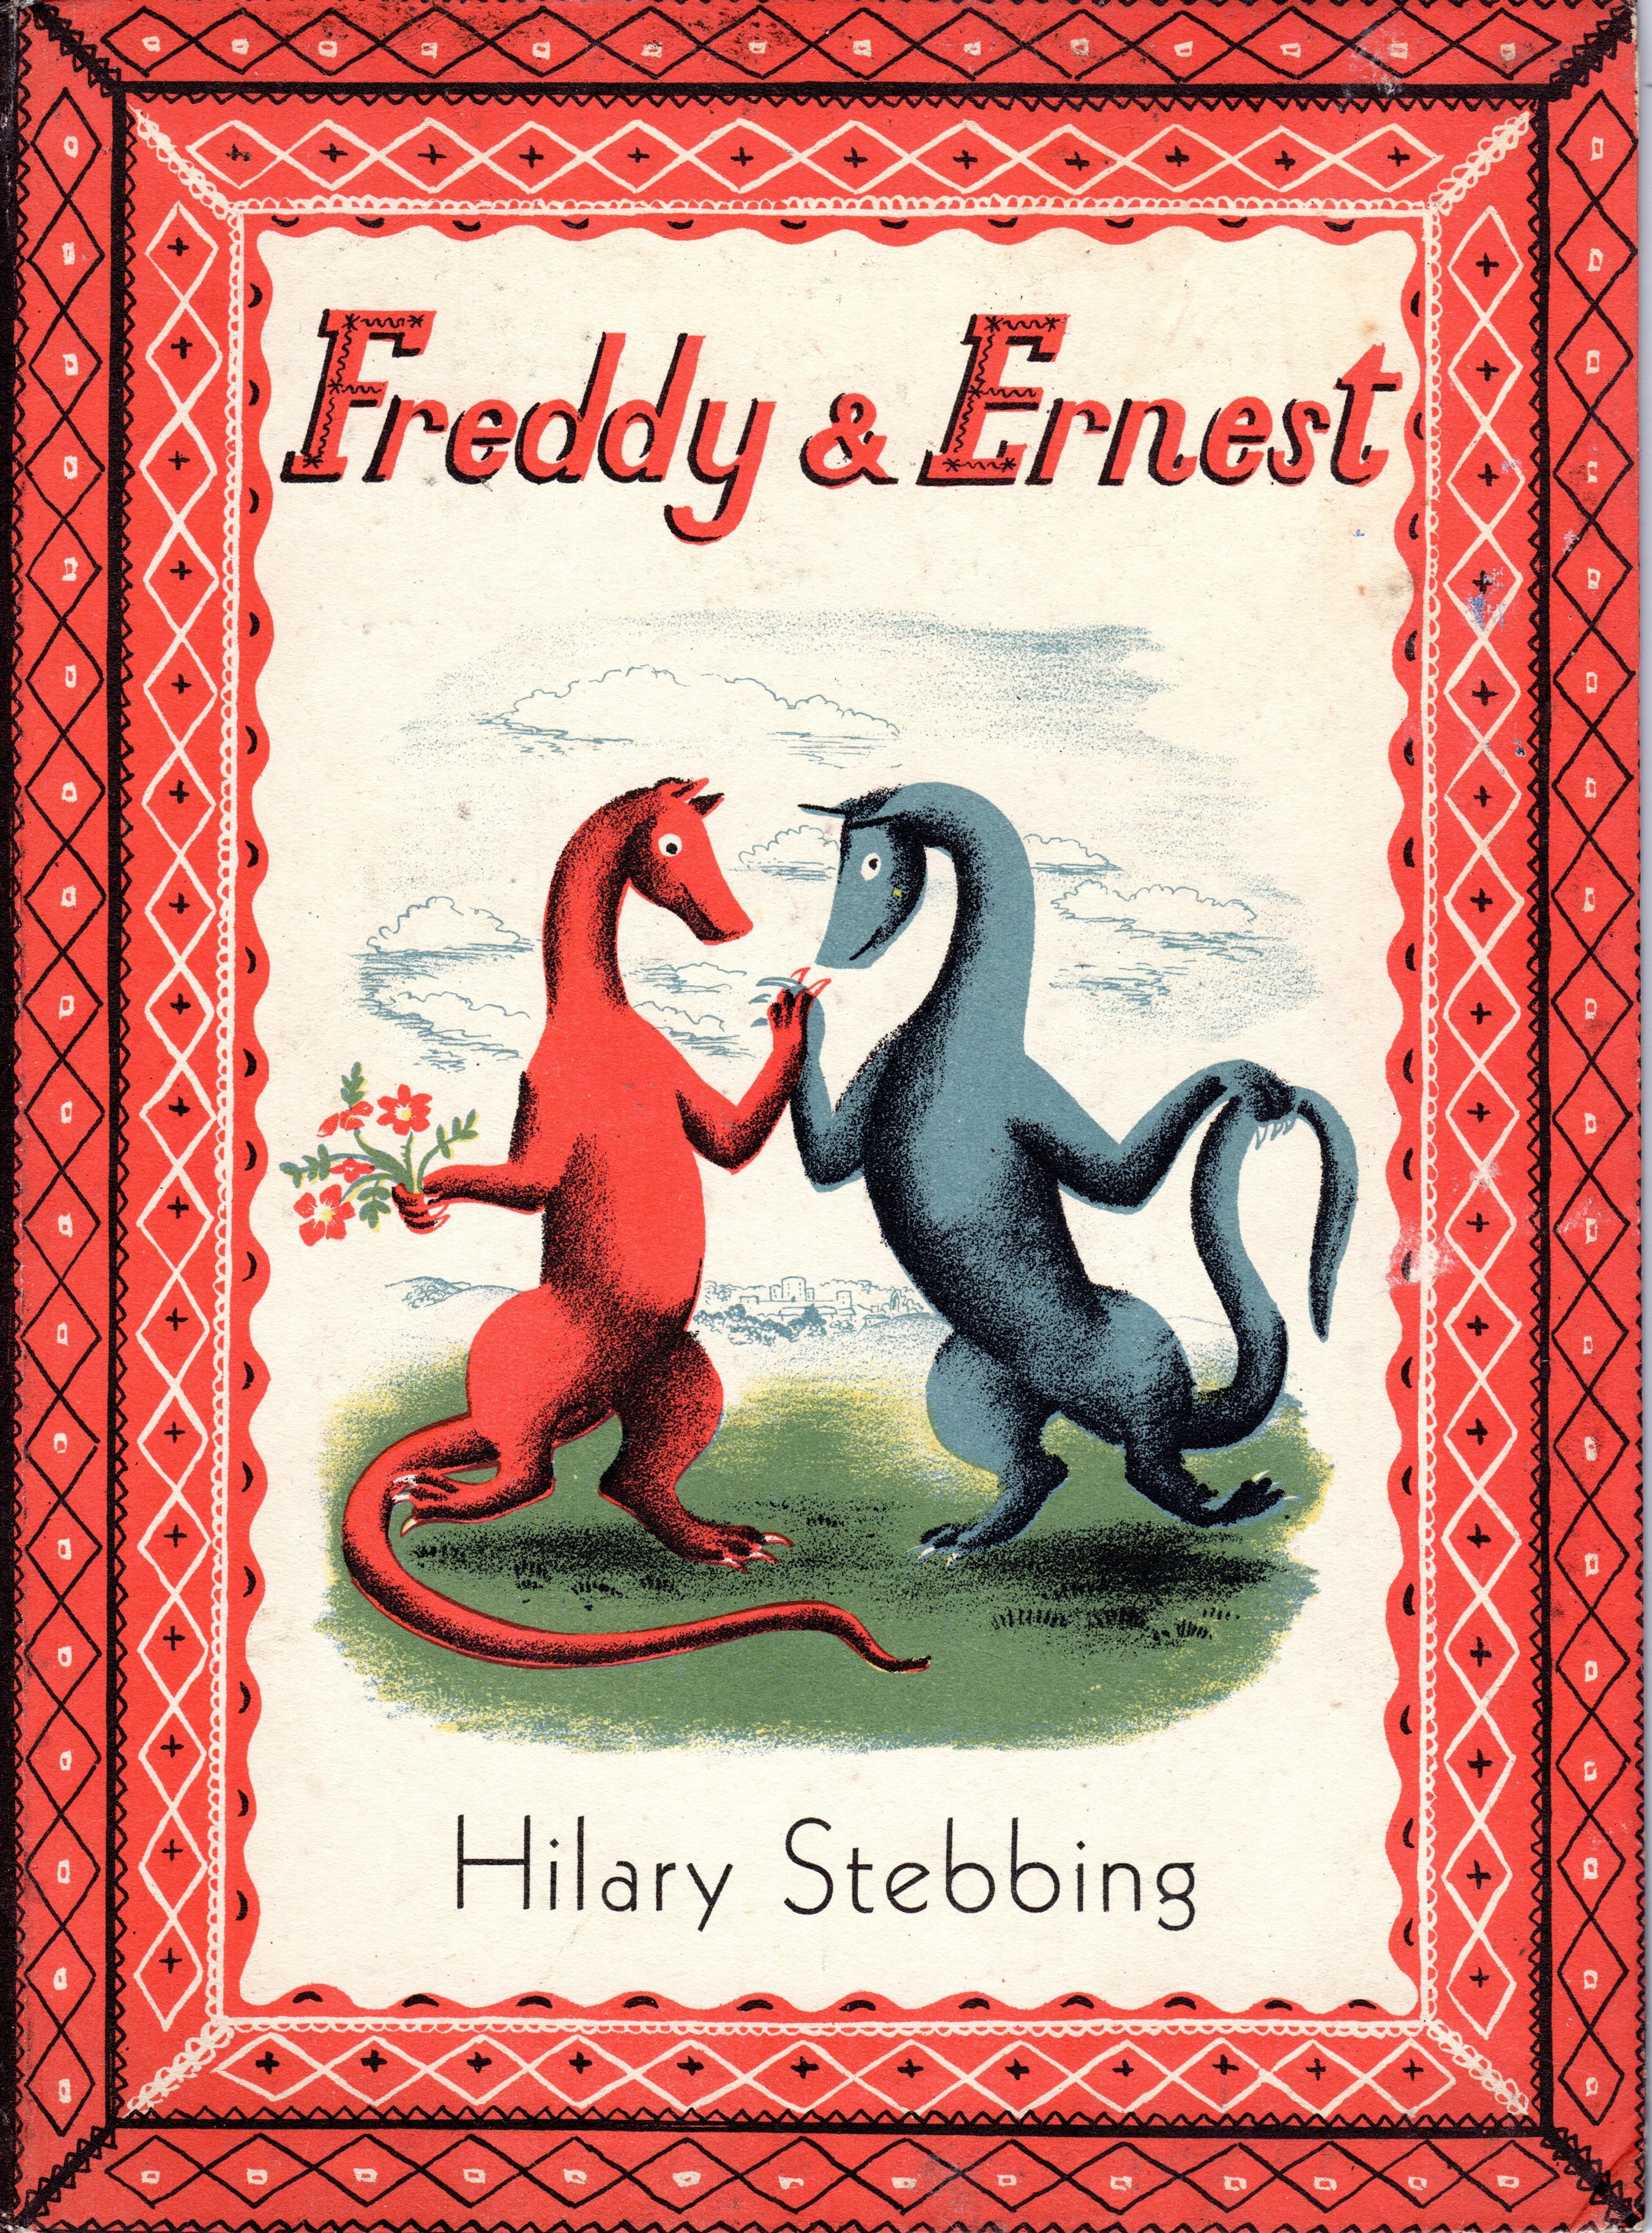 Cover of Freddy and Ernest, Hilary Stebbing, 1946 © The Hilary Stebbing Archive